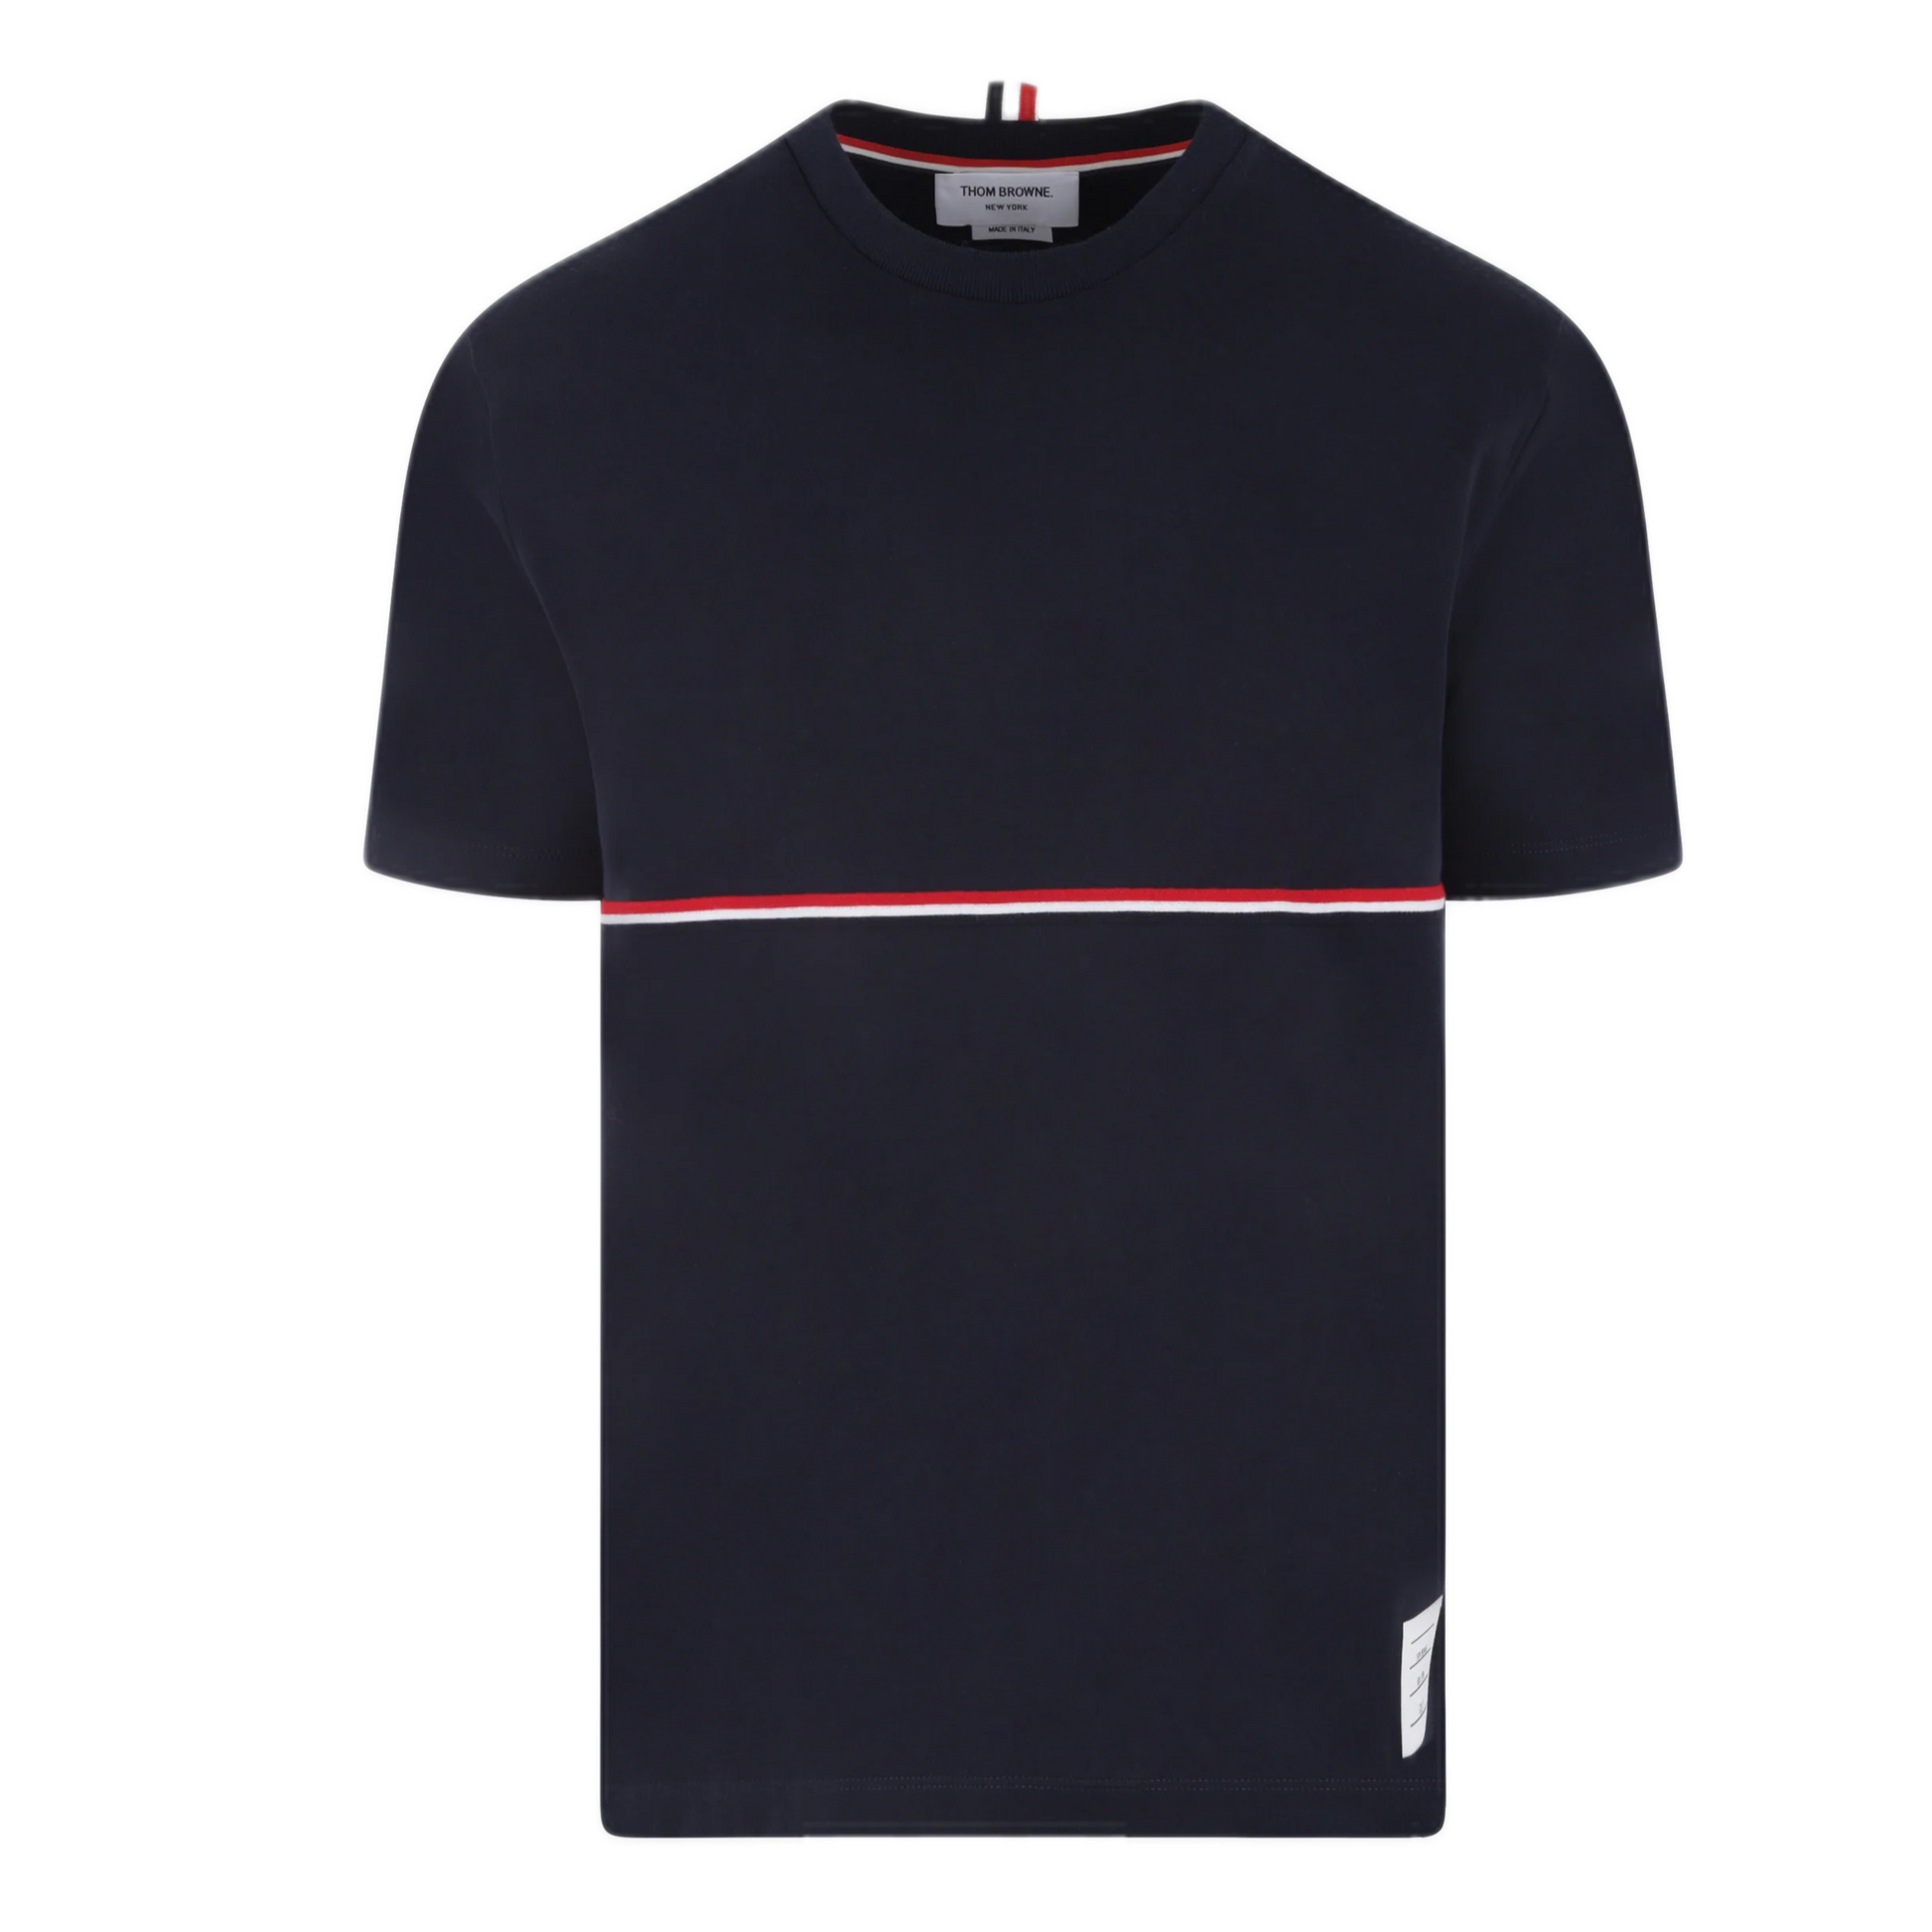 THOM BROWNE T-SHIRT – ETEFT AUTHENTIC